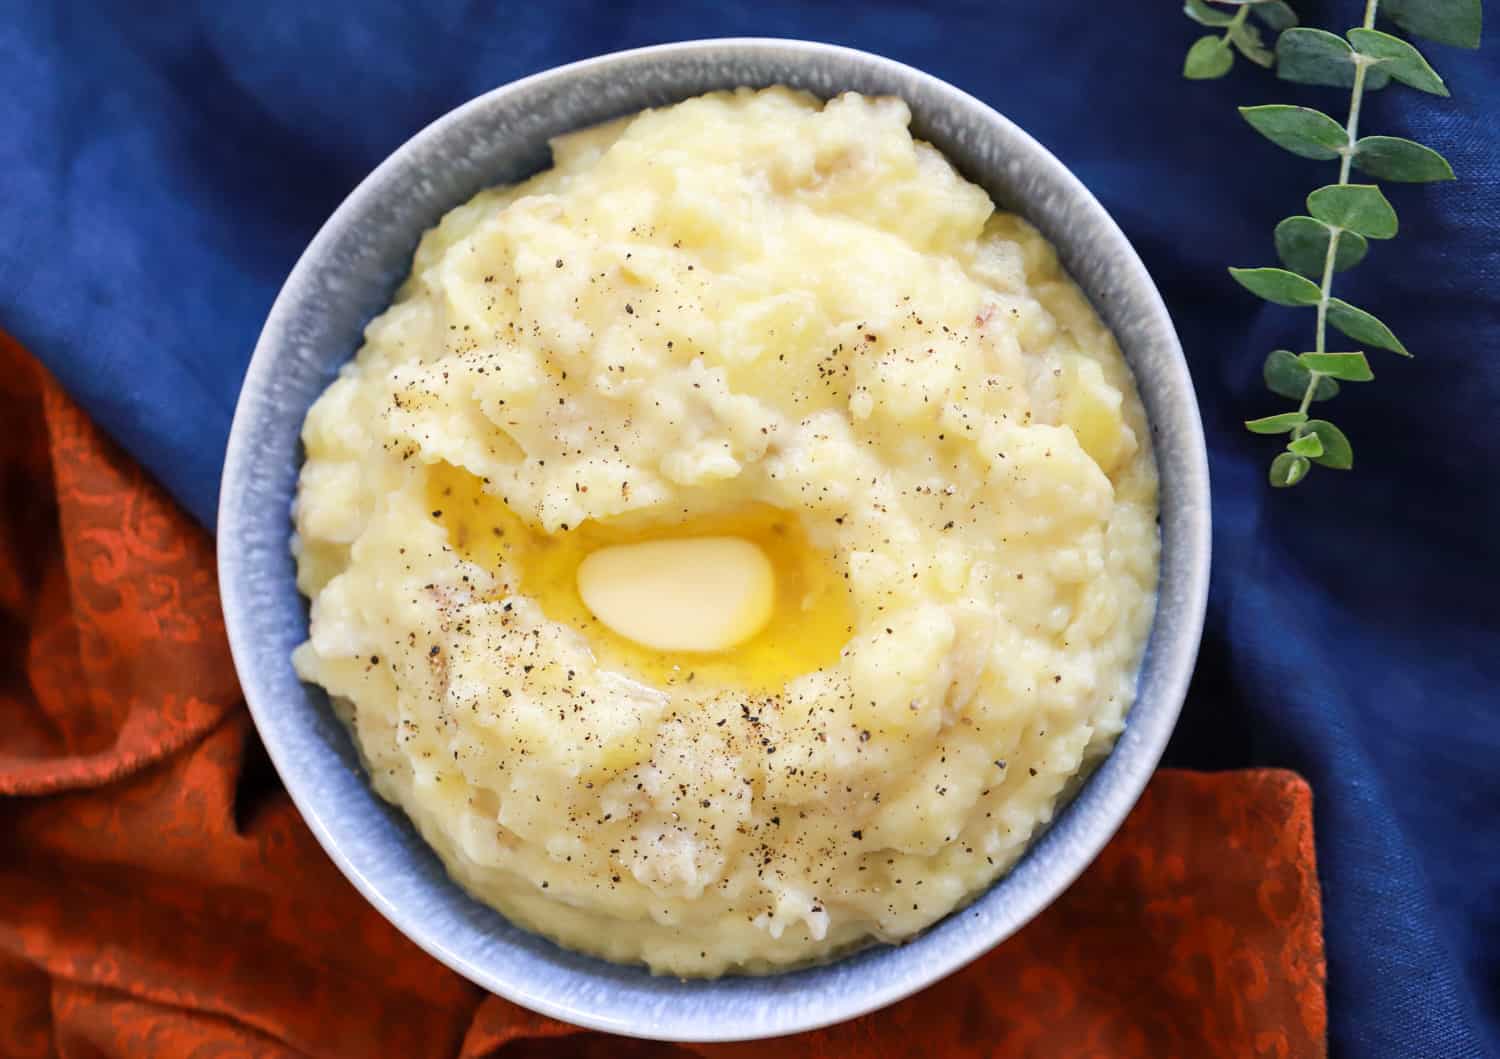 roasted garlic mashed potatoes with a pat of butter on top in a blue bowl on linens.